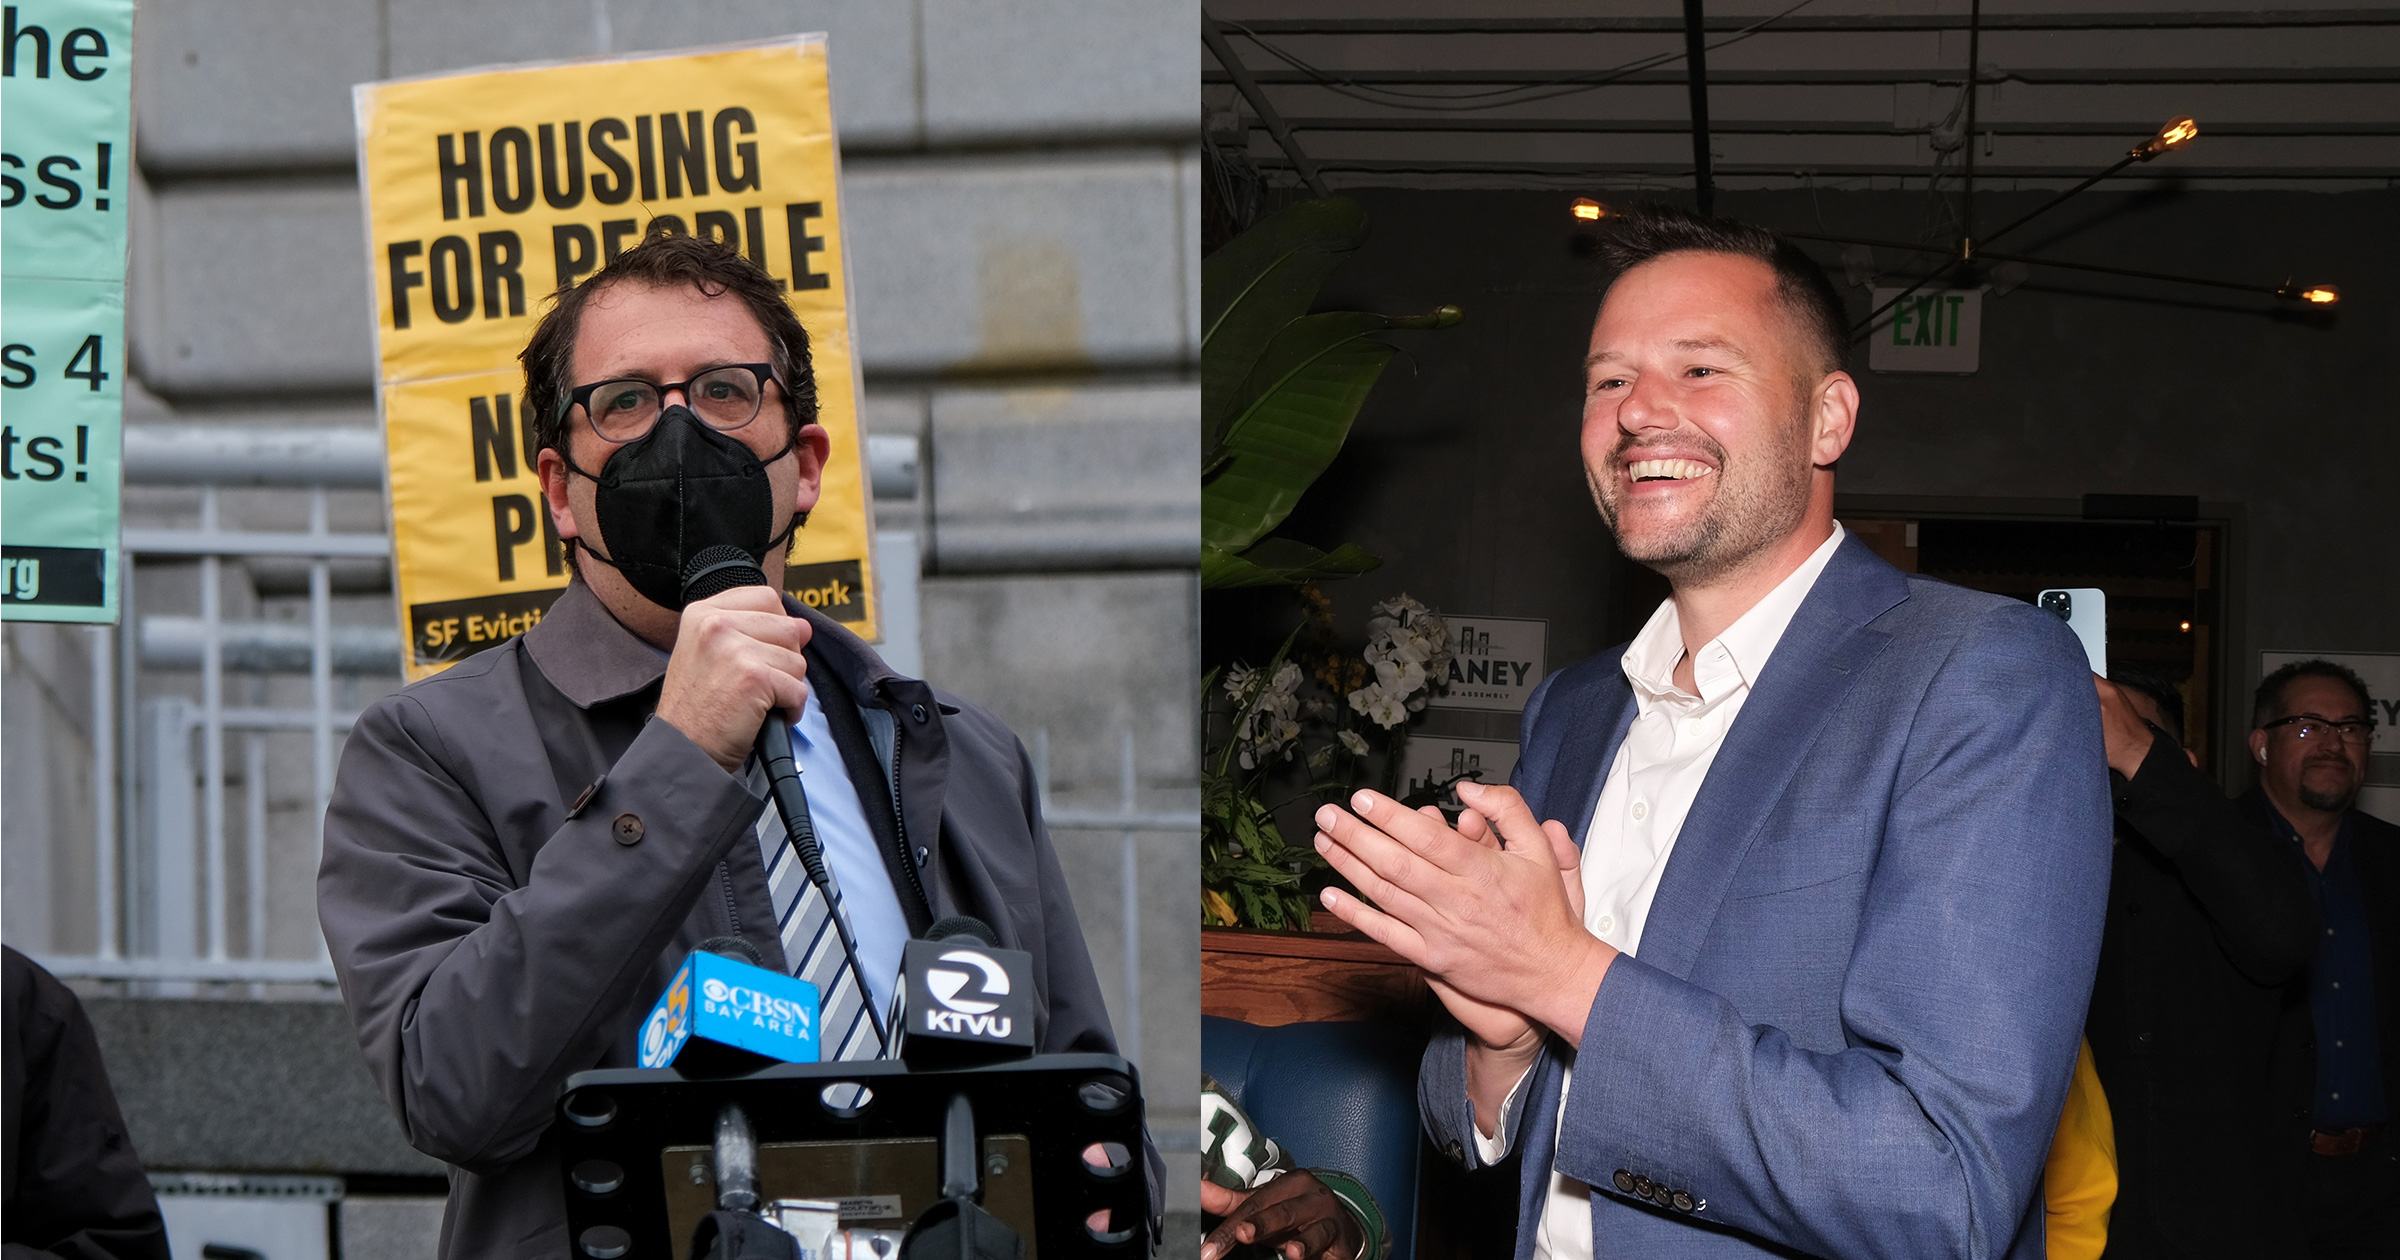 San Francisco’s Most Left-Wing District Saw a 26-Point Swing to the Moderate Side in Most Recent Election 